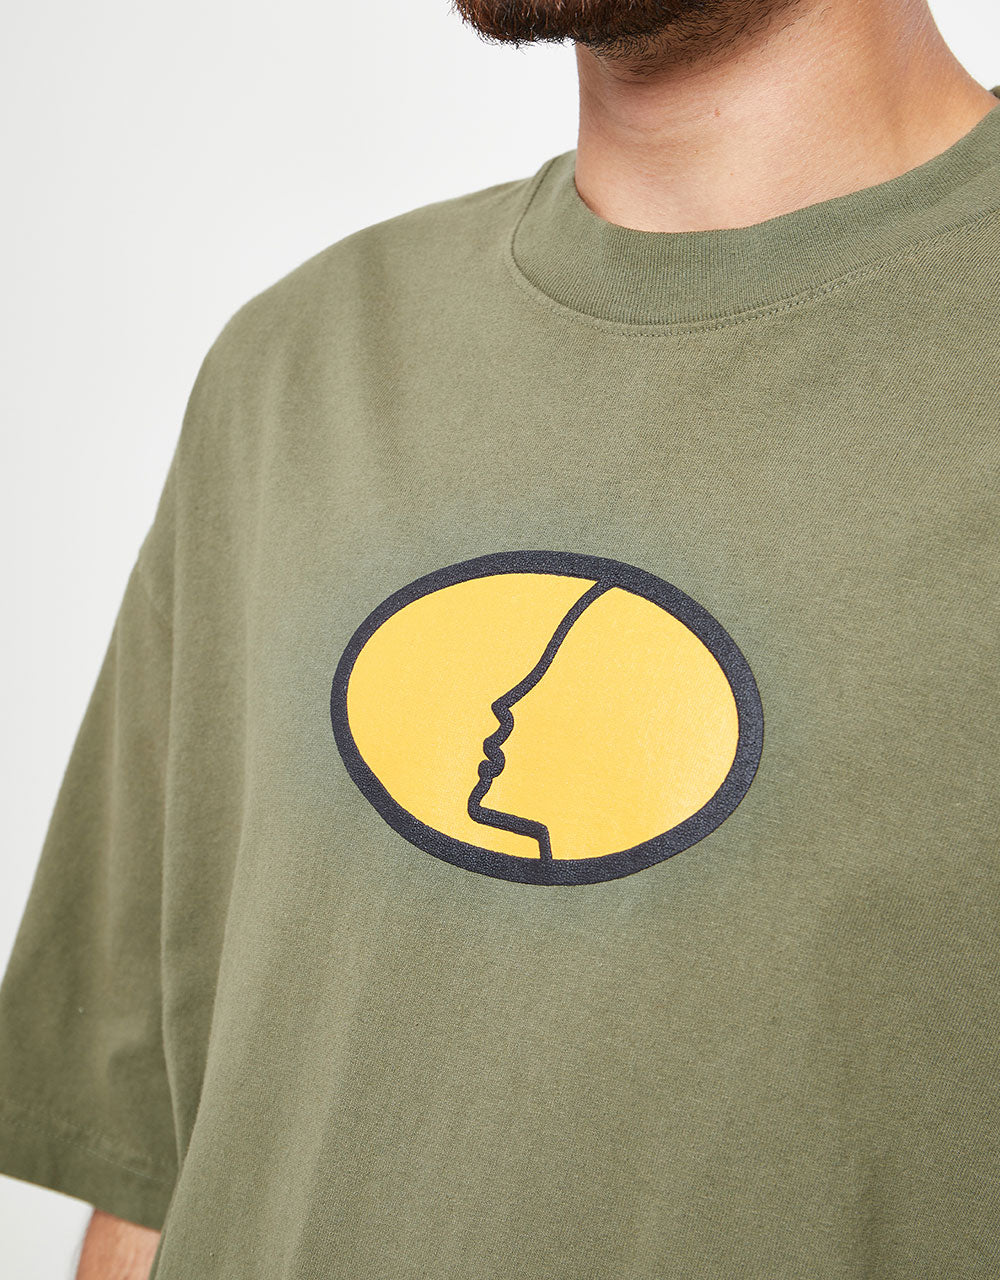 April The Face T-Shirt - Army Green